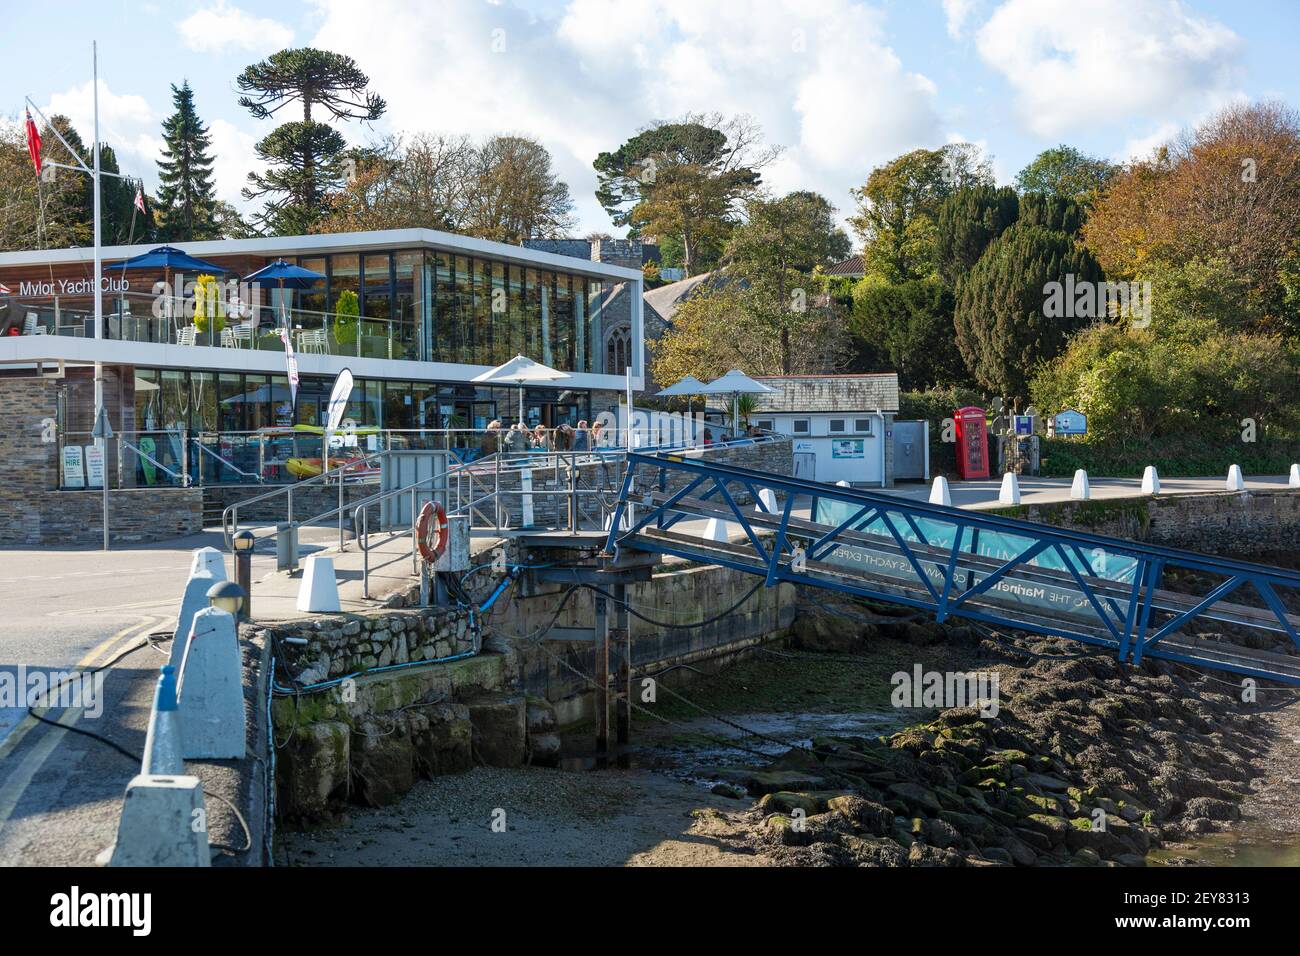 The Mylor Yacht Club with outdoor dining and views from the harbourside on Mylor Creek near Falmouth in Cornwall Stock Photo